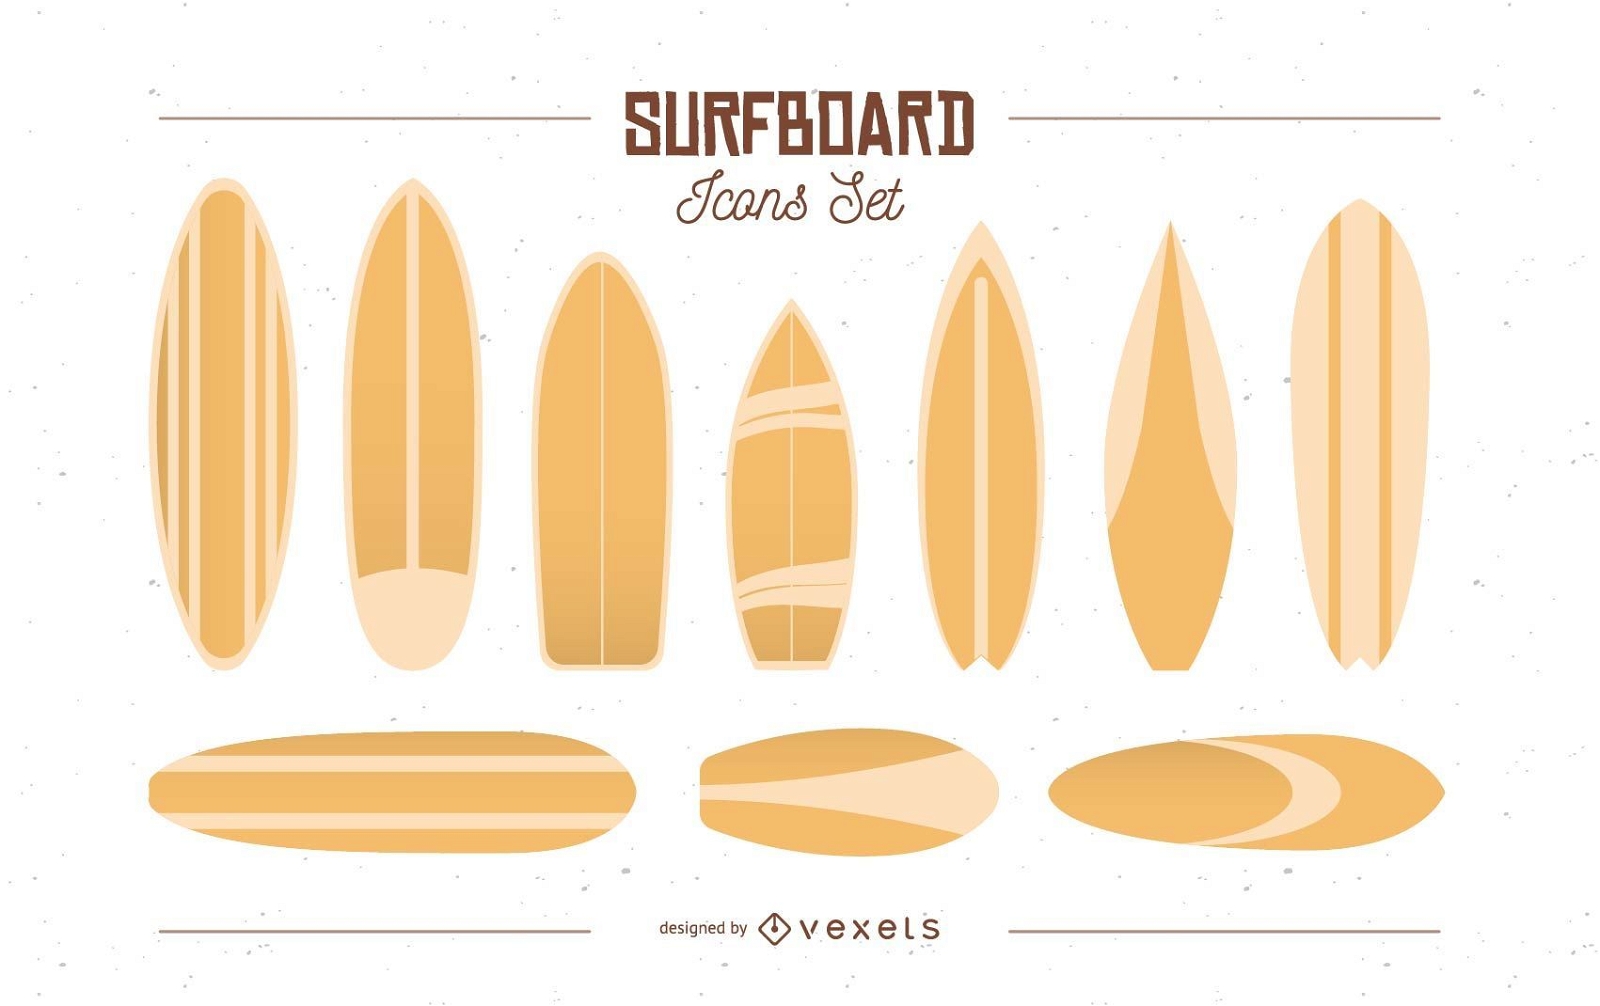 Surfboard Icons Set